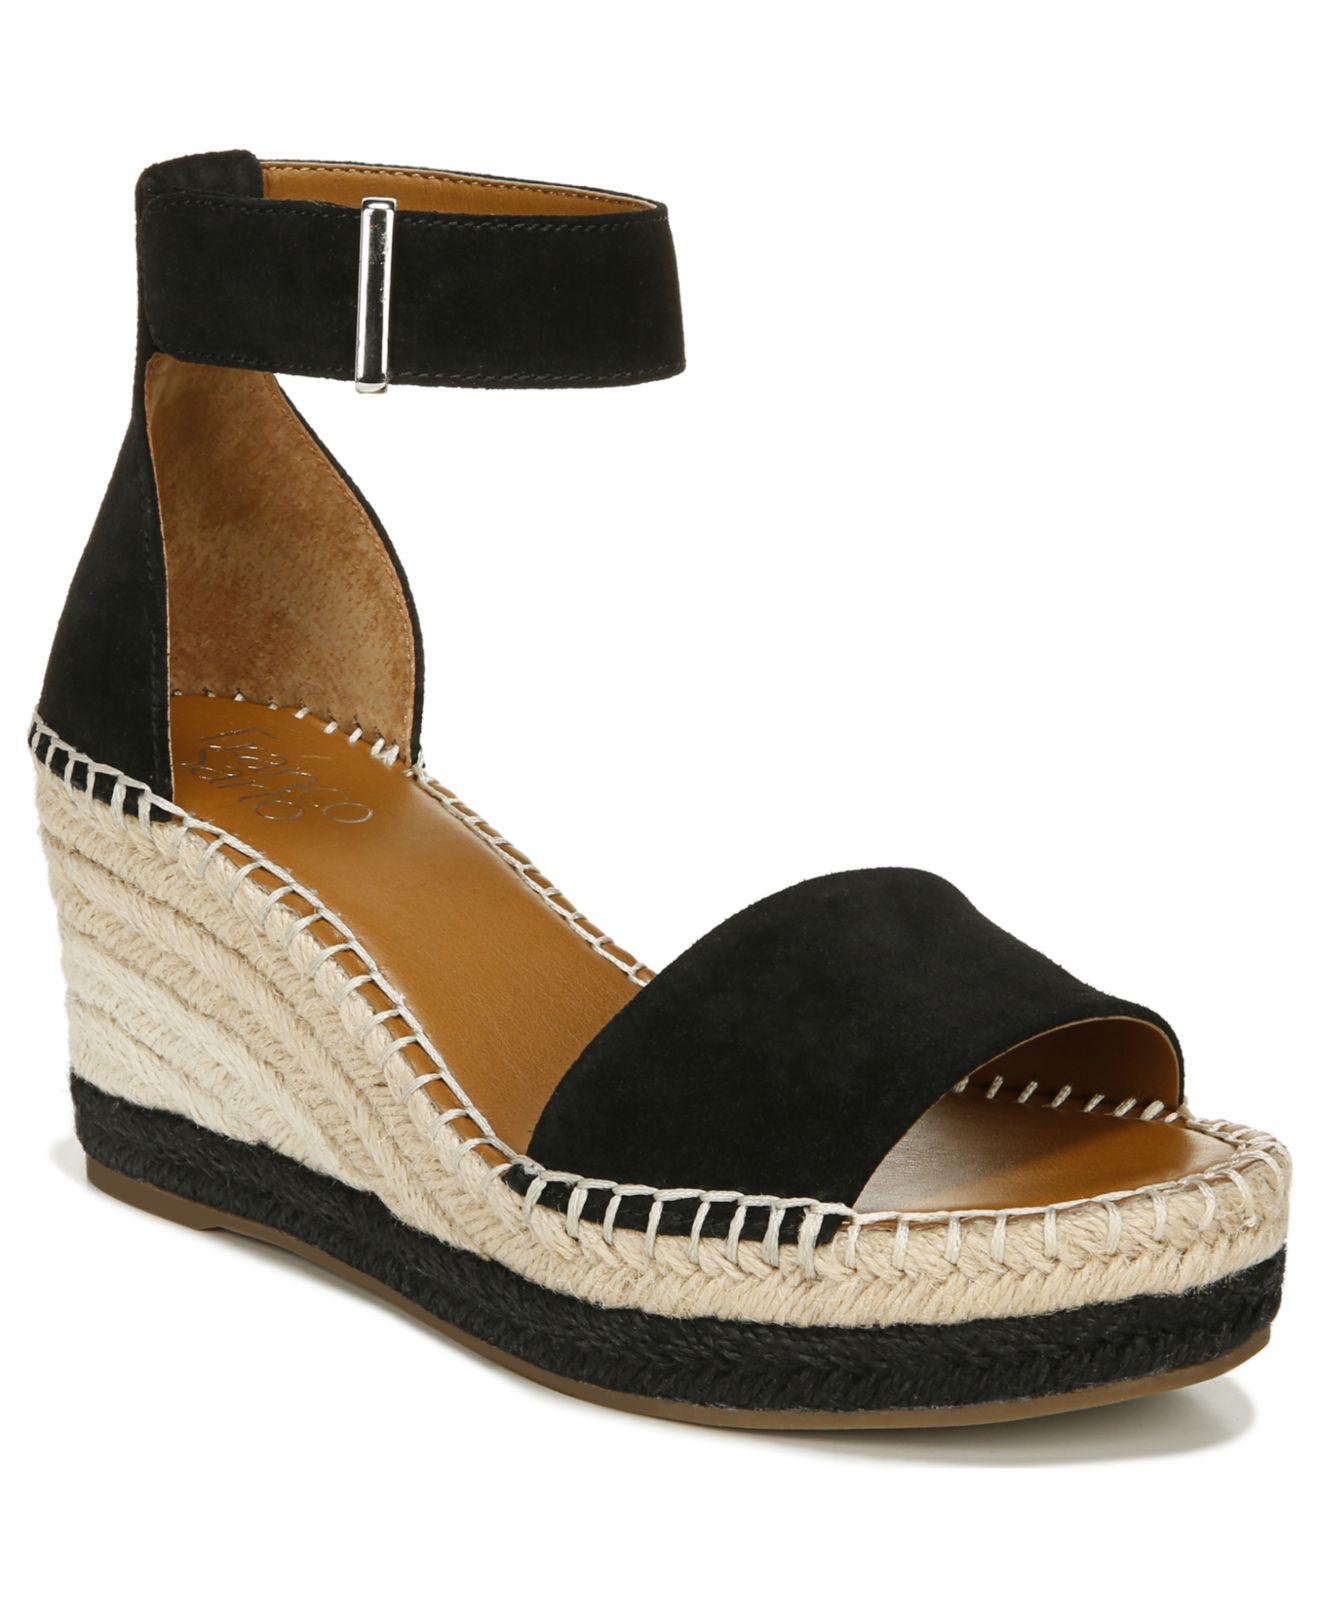 Franco Sarto Leather Clemens Wedge Sandals in Black Suede (Black) - Lyst